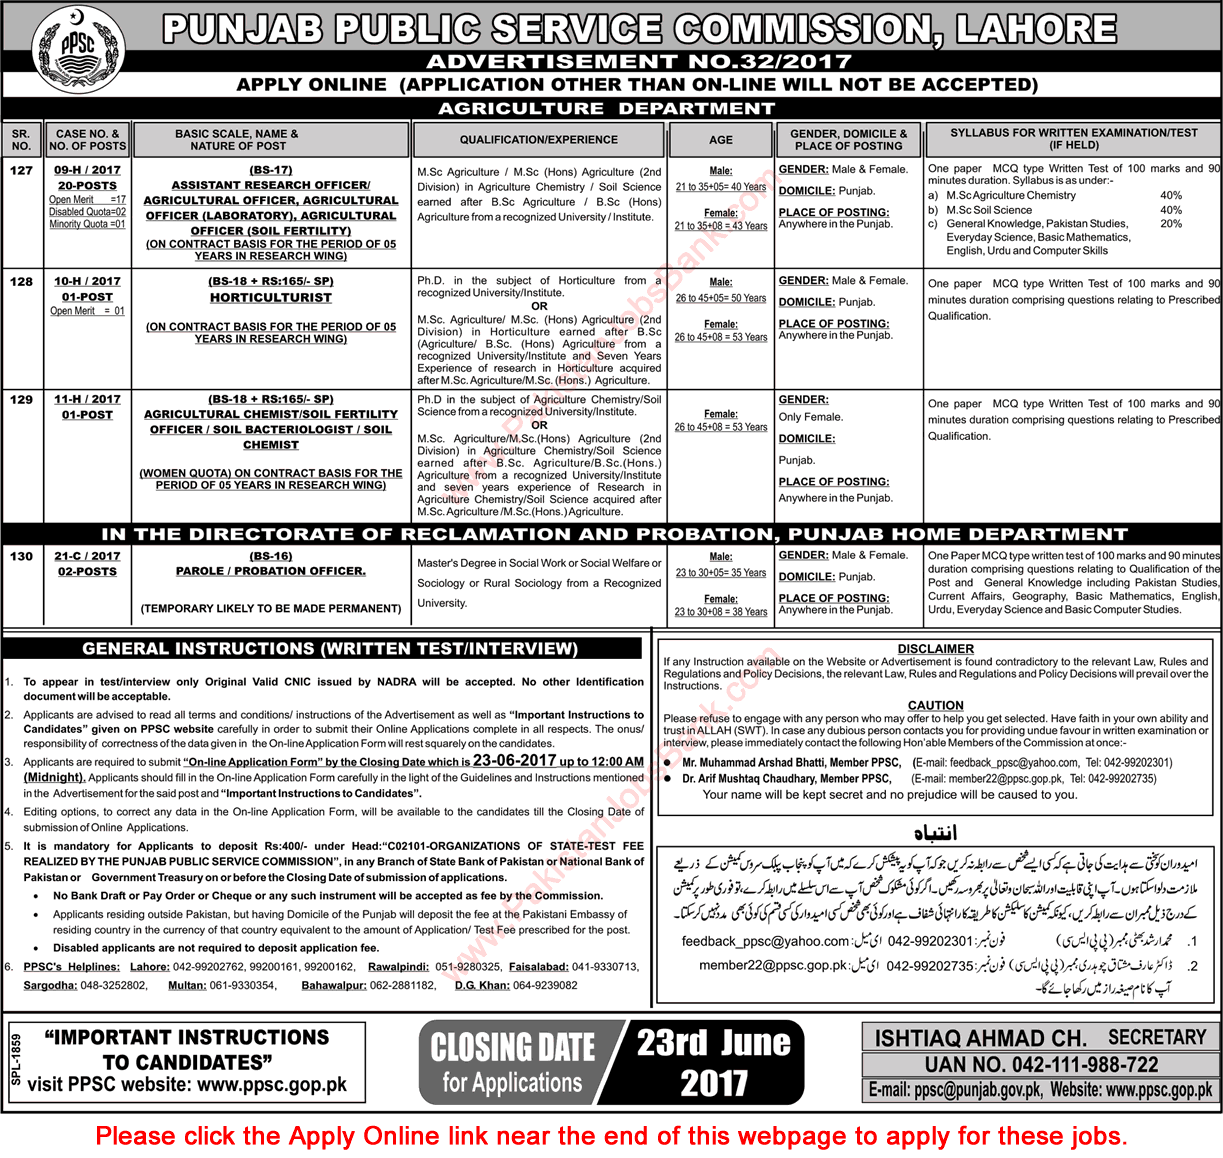 PPSC Jobs June 2017 Consolidated Advertisement No 32/2017 Apply Online Latest